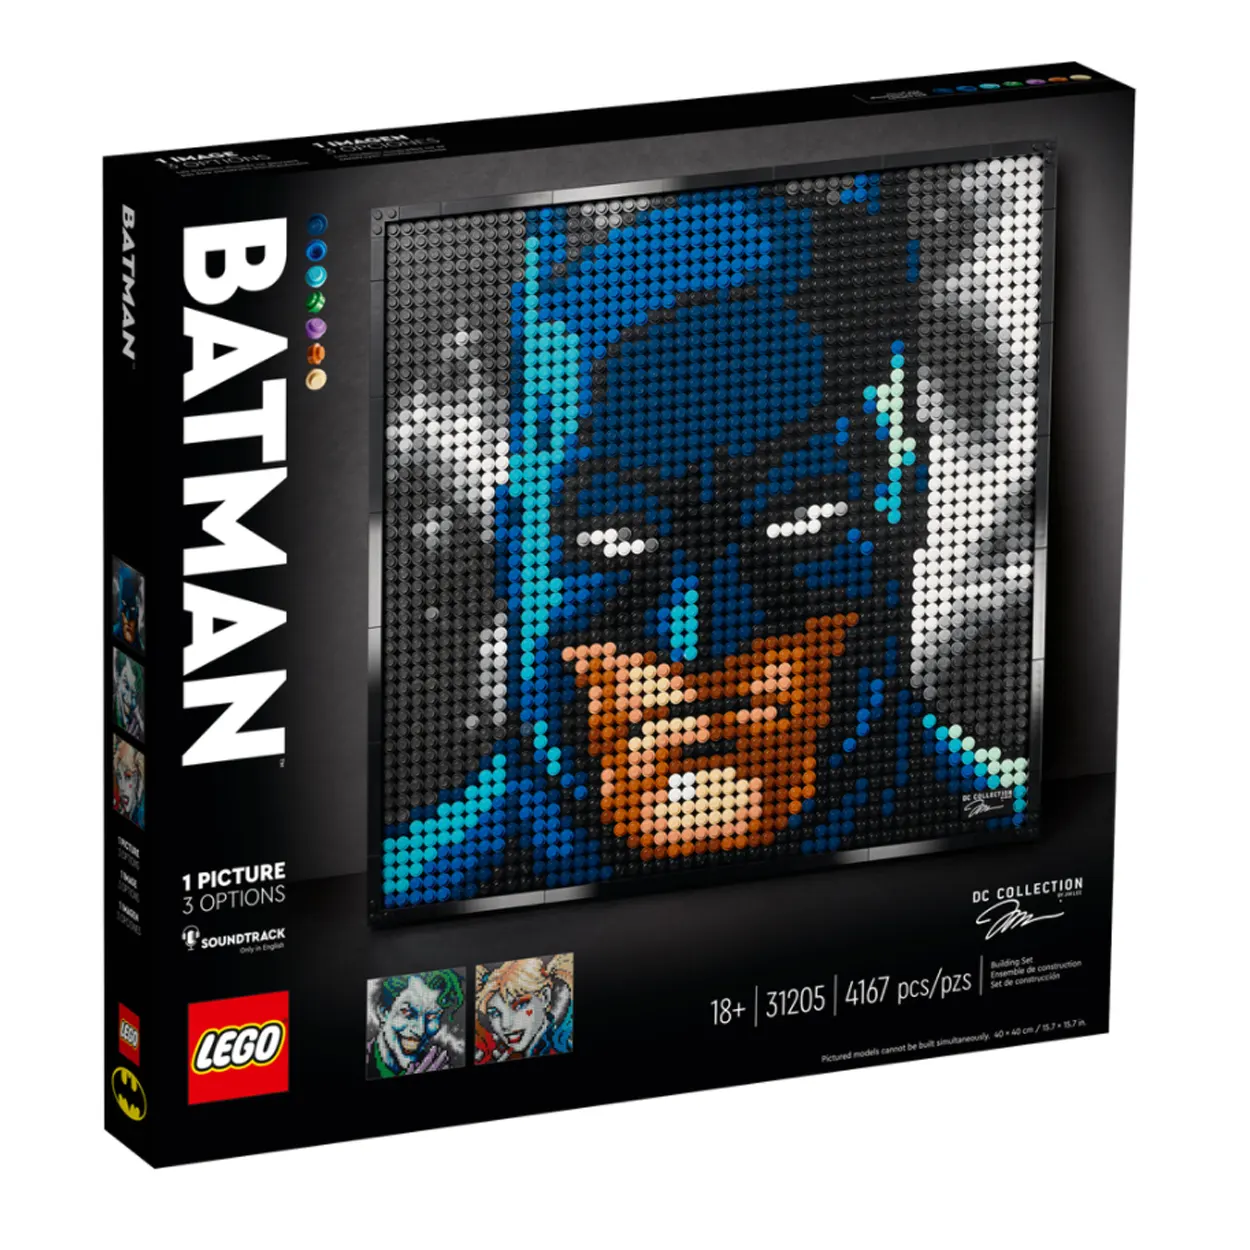 LEGO ART Jim Lee Batman™ Collection Officially Revealed | New set for March 1st 2022